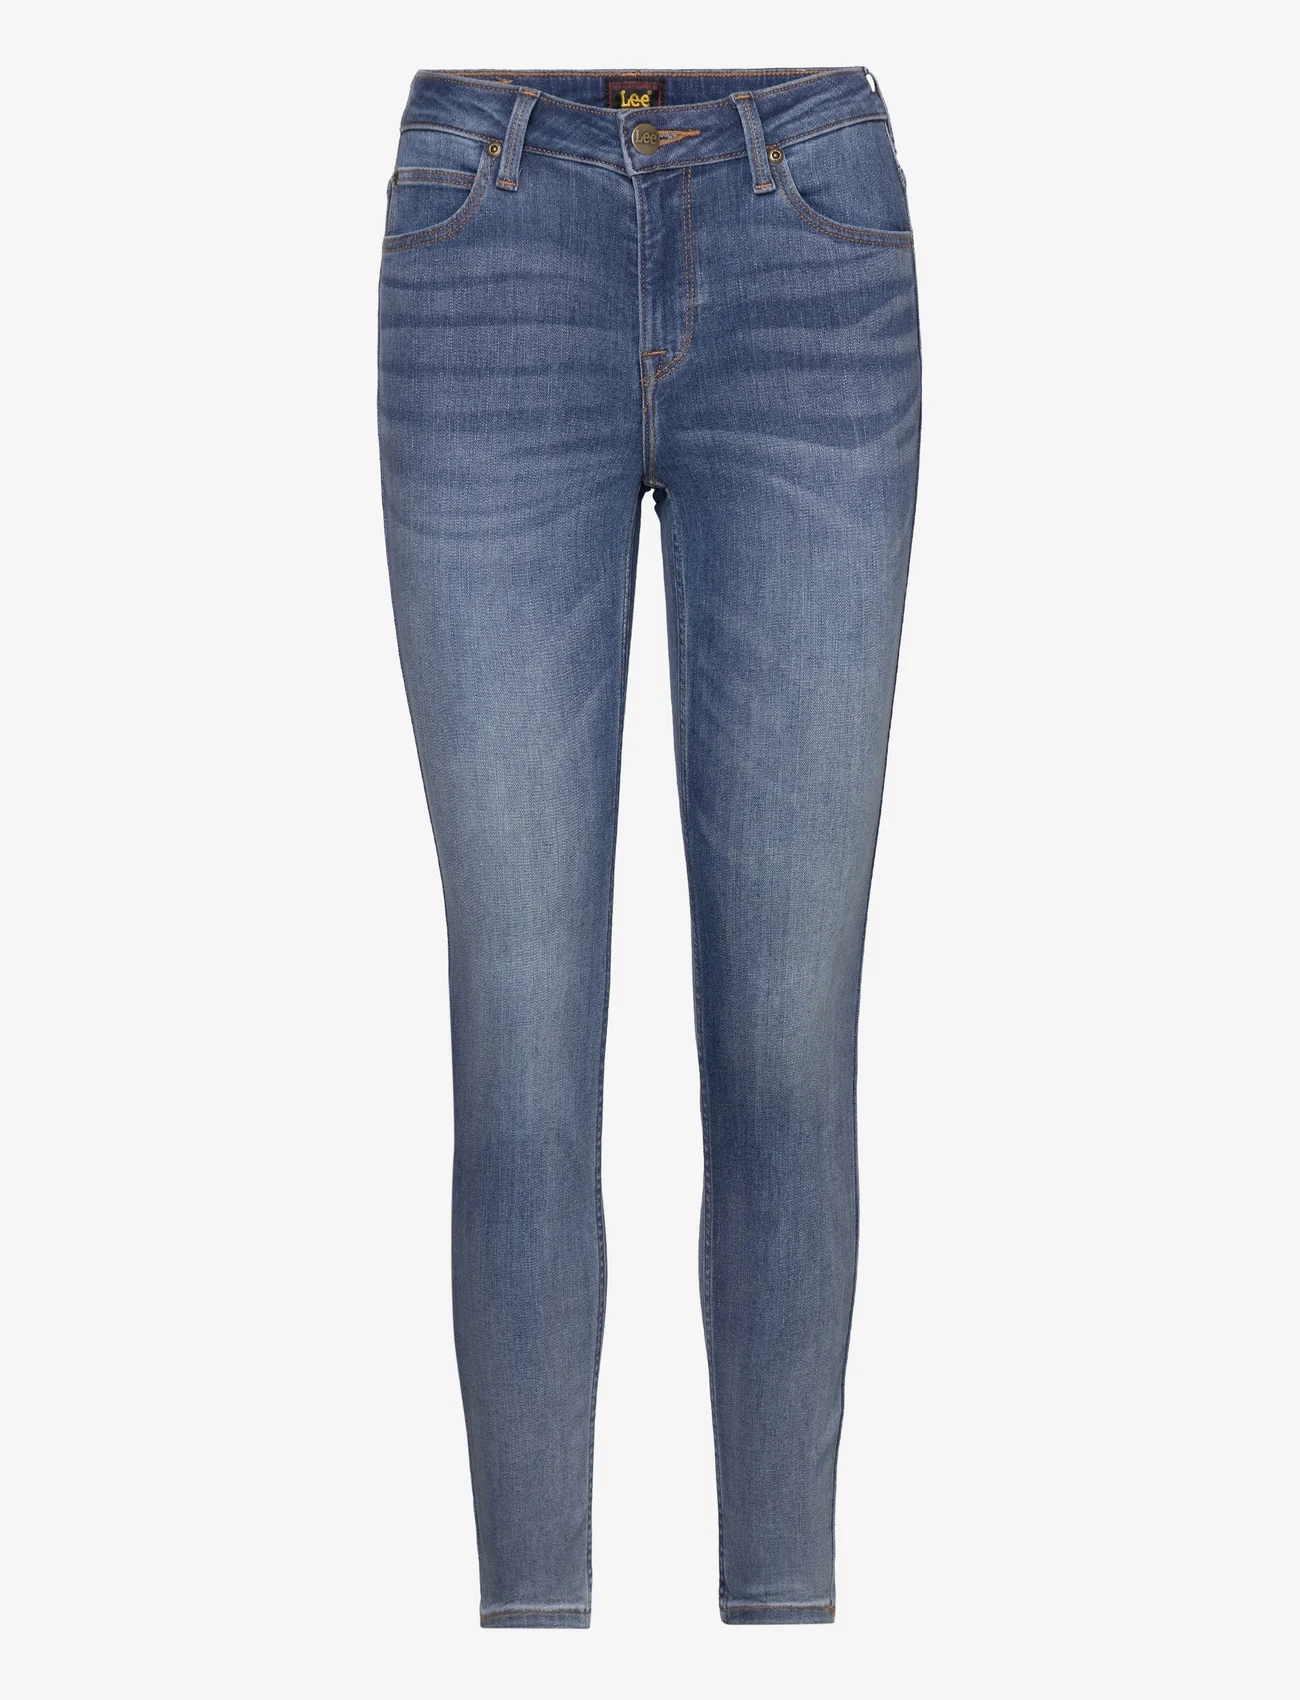 Lee Jeans - SCARLETT HIGH - slim jeans - country stone - 0